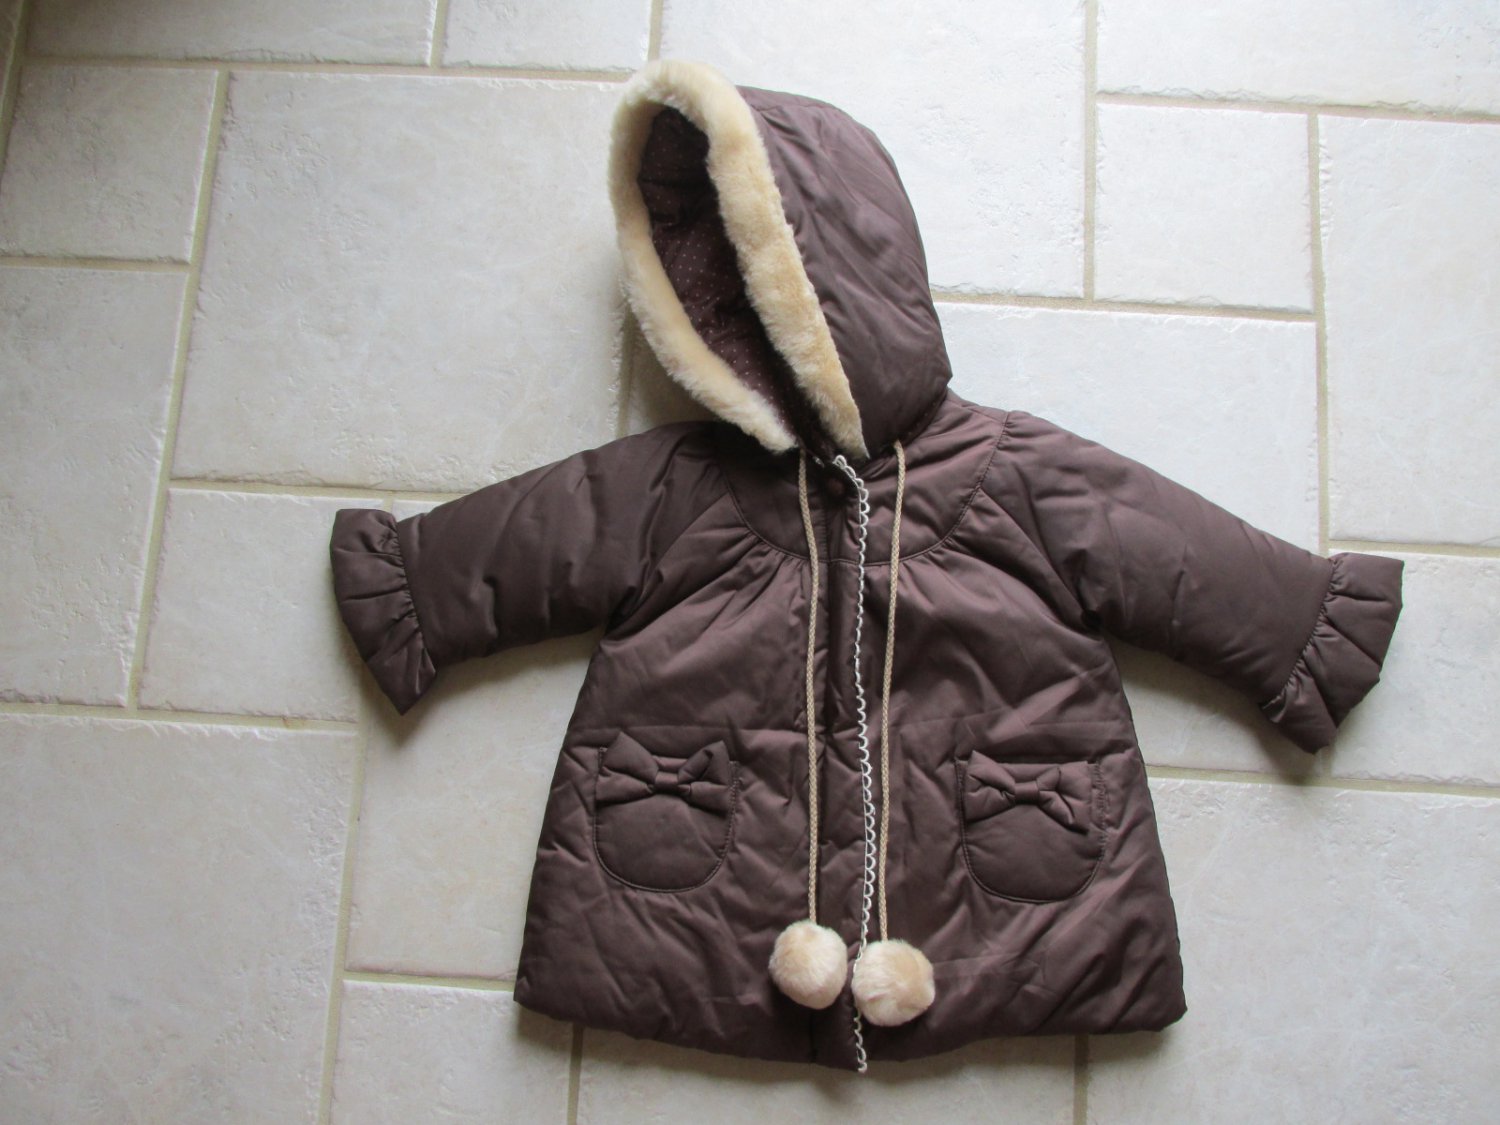 COTTON BABY GIRL'S SIZE XS (4) COAT BROWN HOOD PARKA JACKET WINTER OUTERWEAR